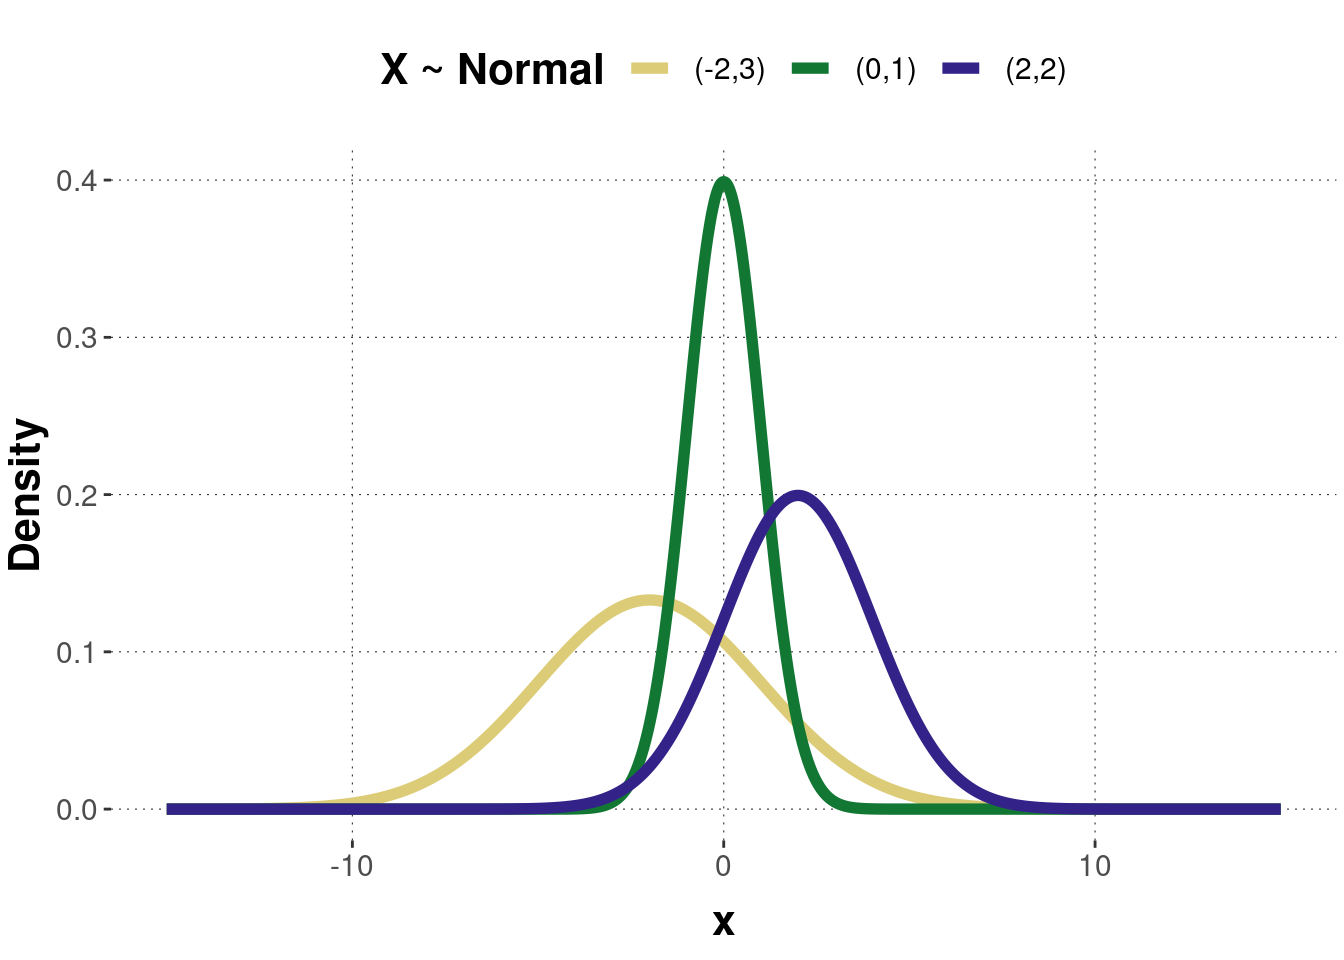 Examples of a probability density function of the normal distribution. Numbers in legend represent parameter pairs $(\mu, \sigma)$.